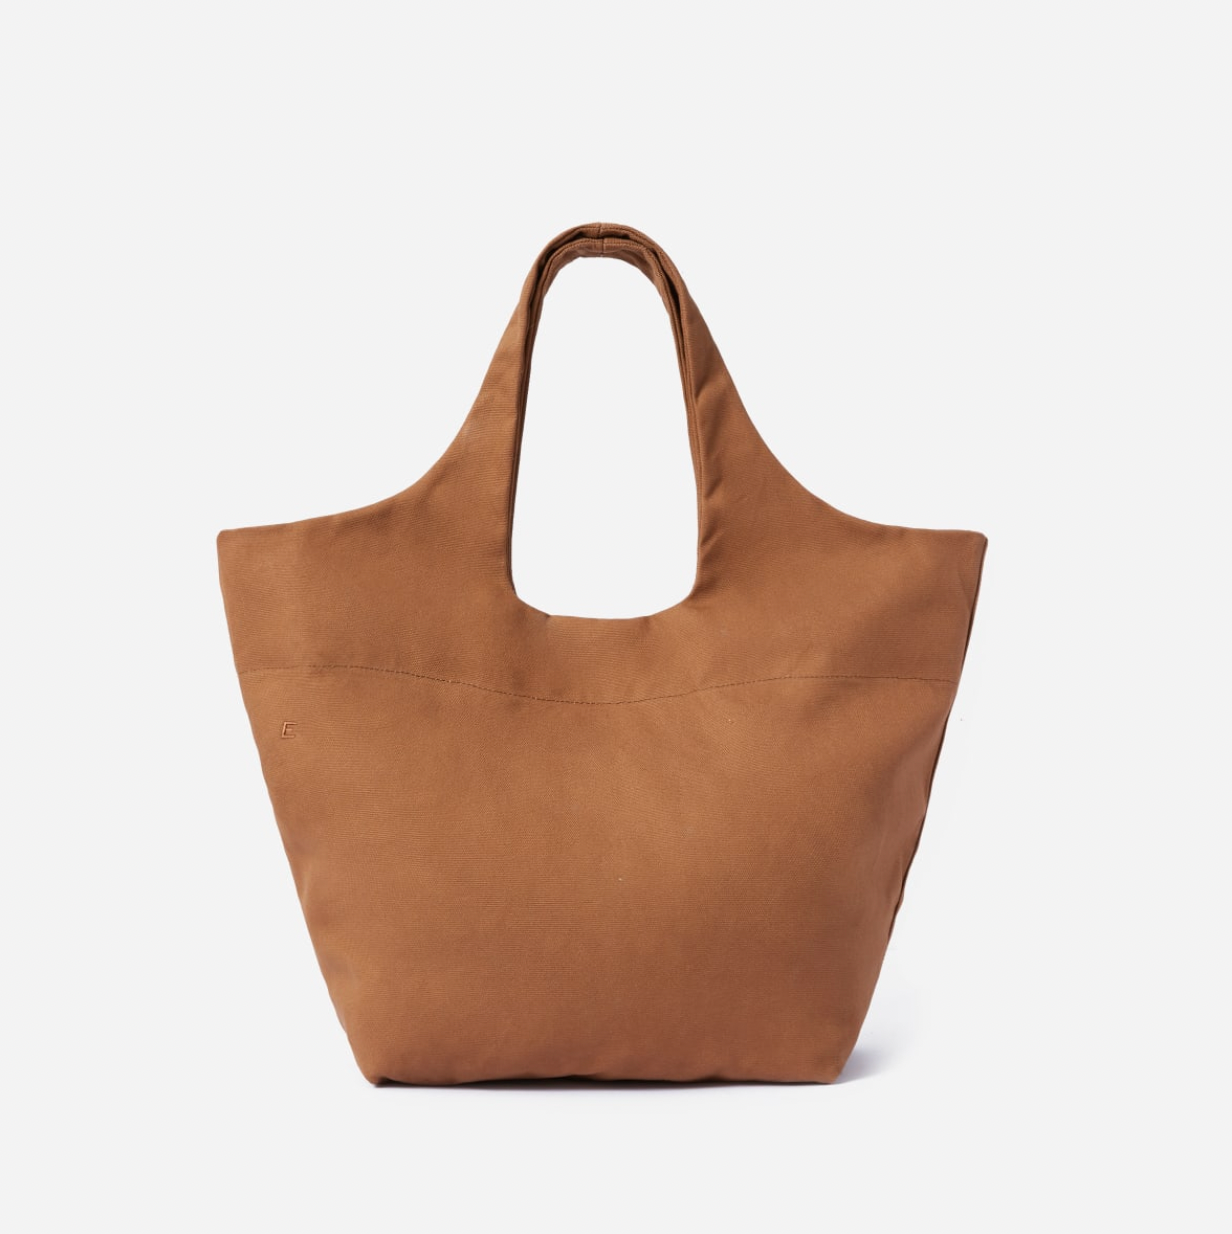 The Canvas Basket Tote